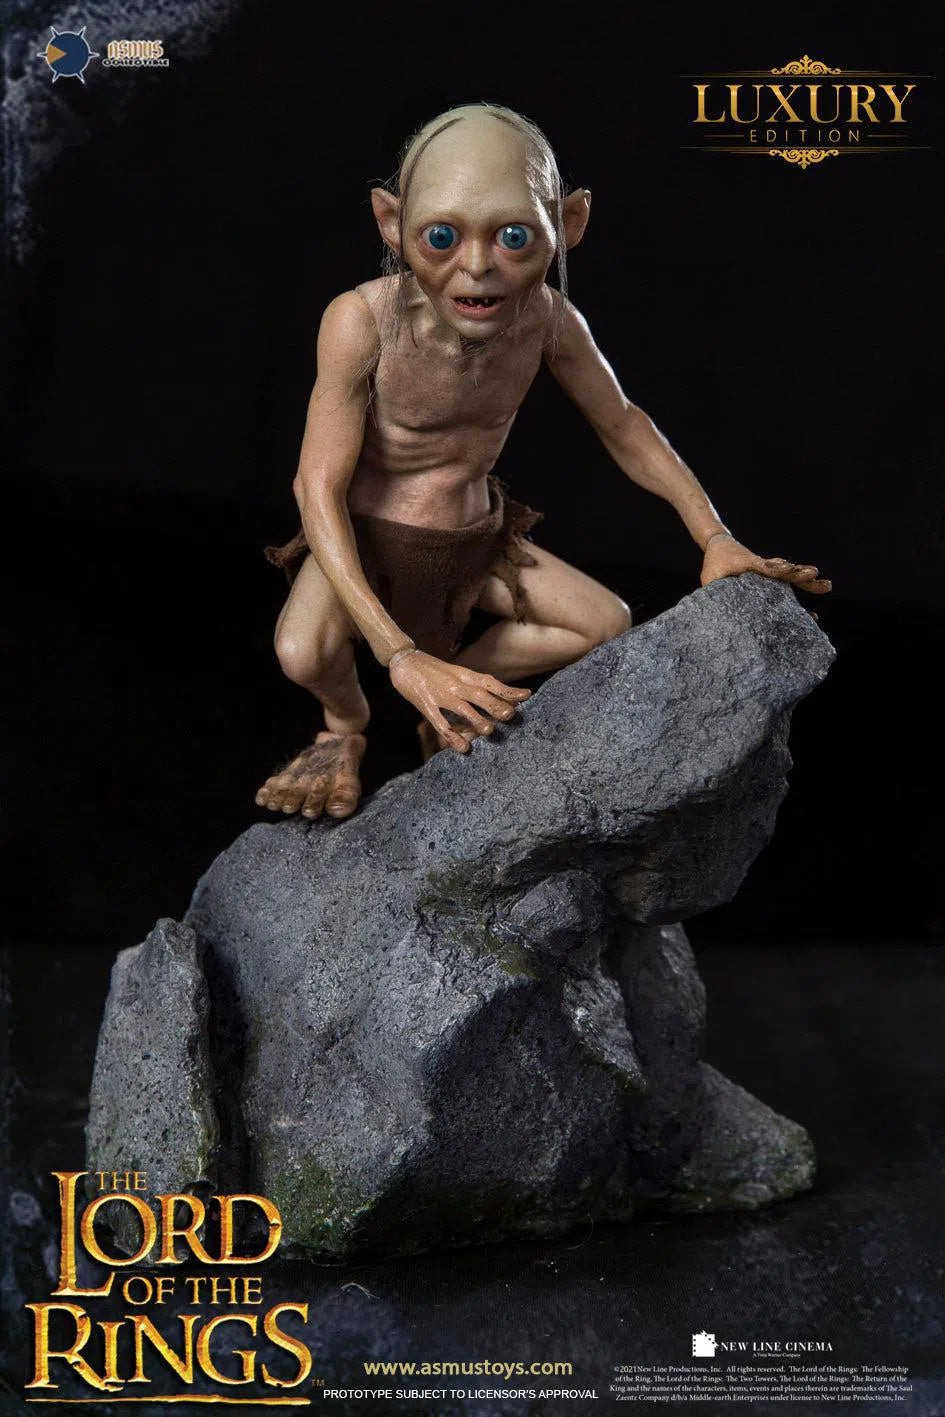 Gollum and Sméagol: Double Pack: Lord Of The Rings: Luxury Edition: Asmus: LOTR30LUX: Asmus Toys